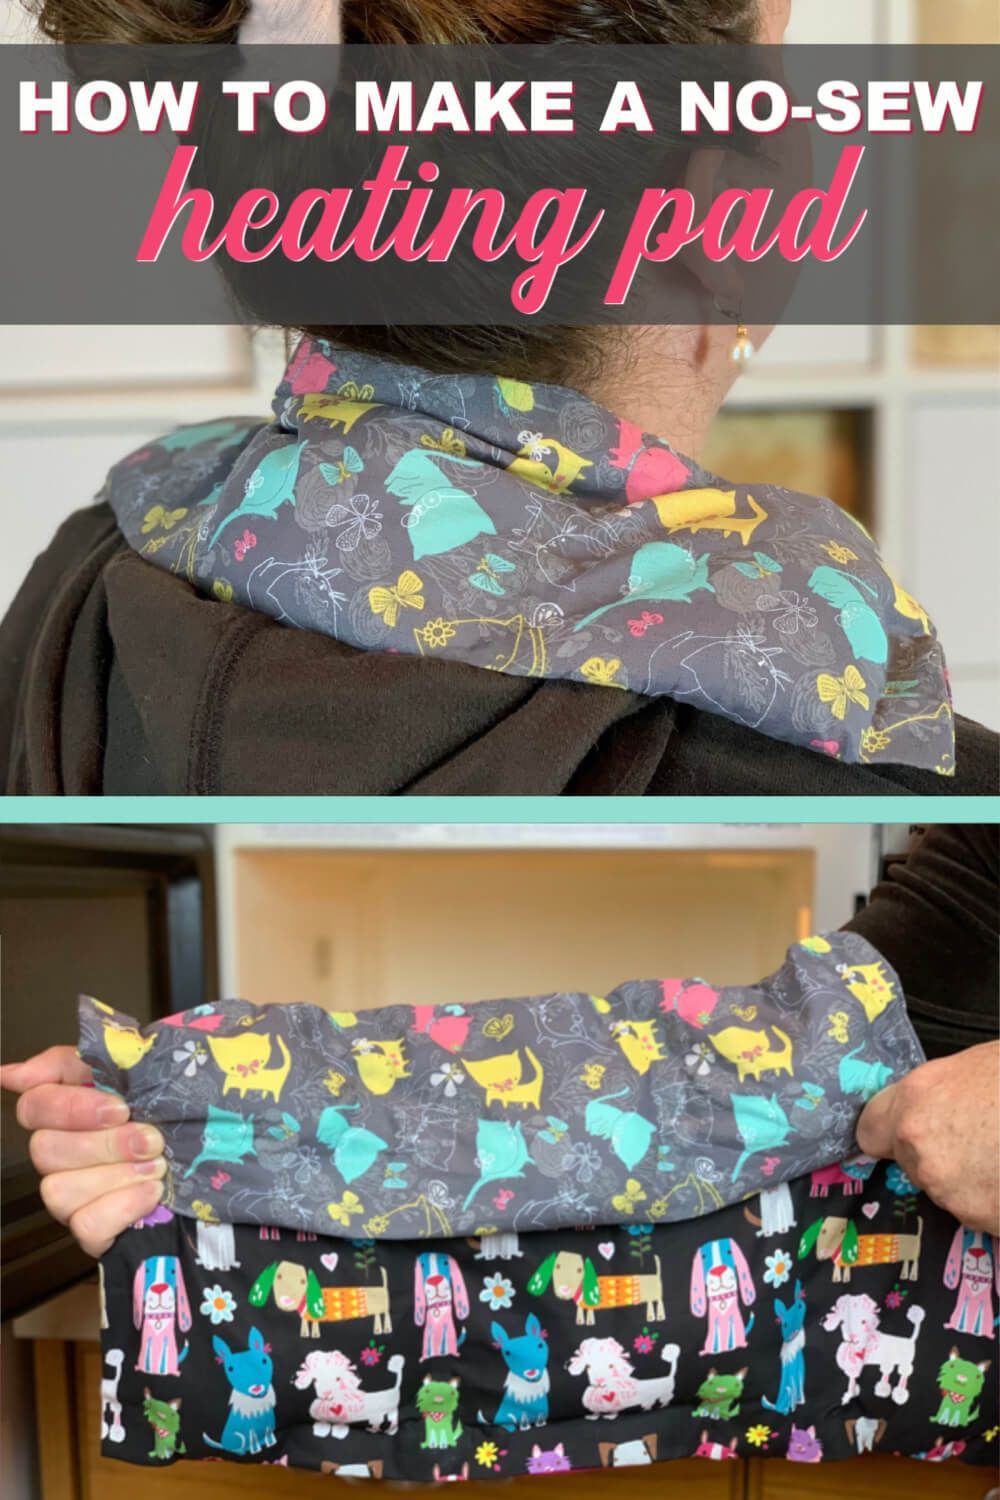 How To No-Sew The Best Heating Pad For Great Gifts - How To No-Sew The Best Heating Pad For Great Gifts -   19 fabric crafts diy no sew ideas